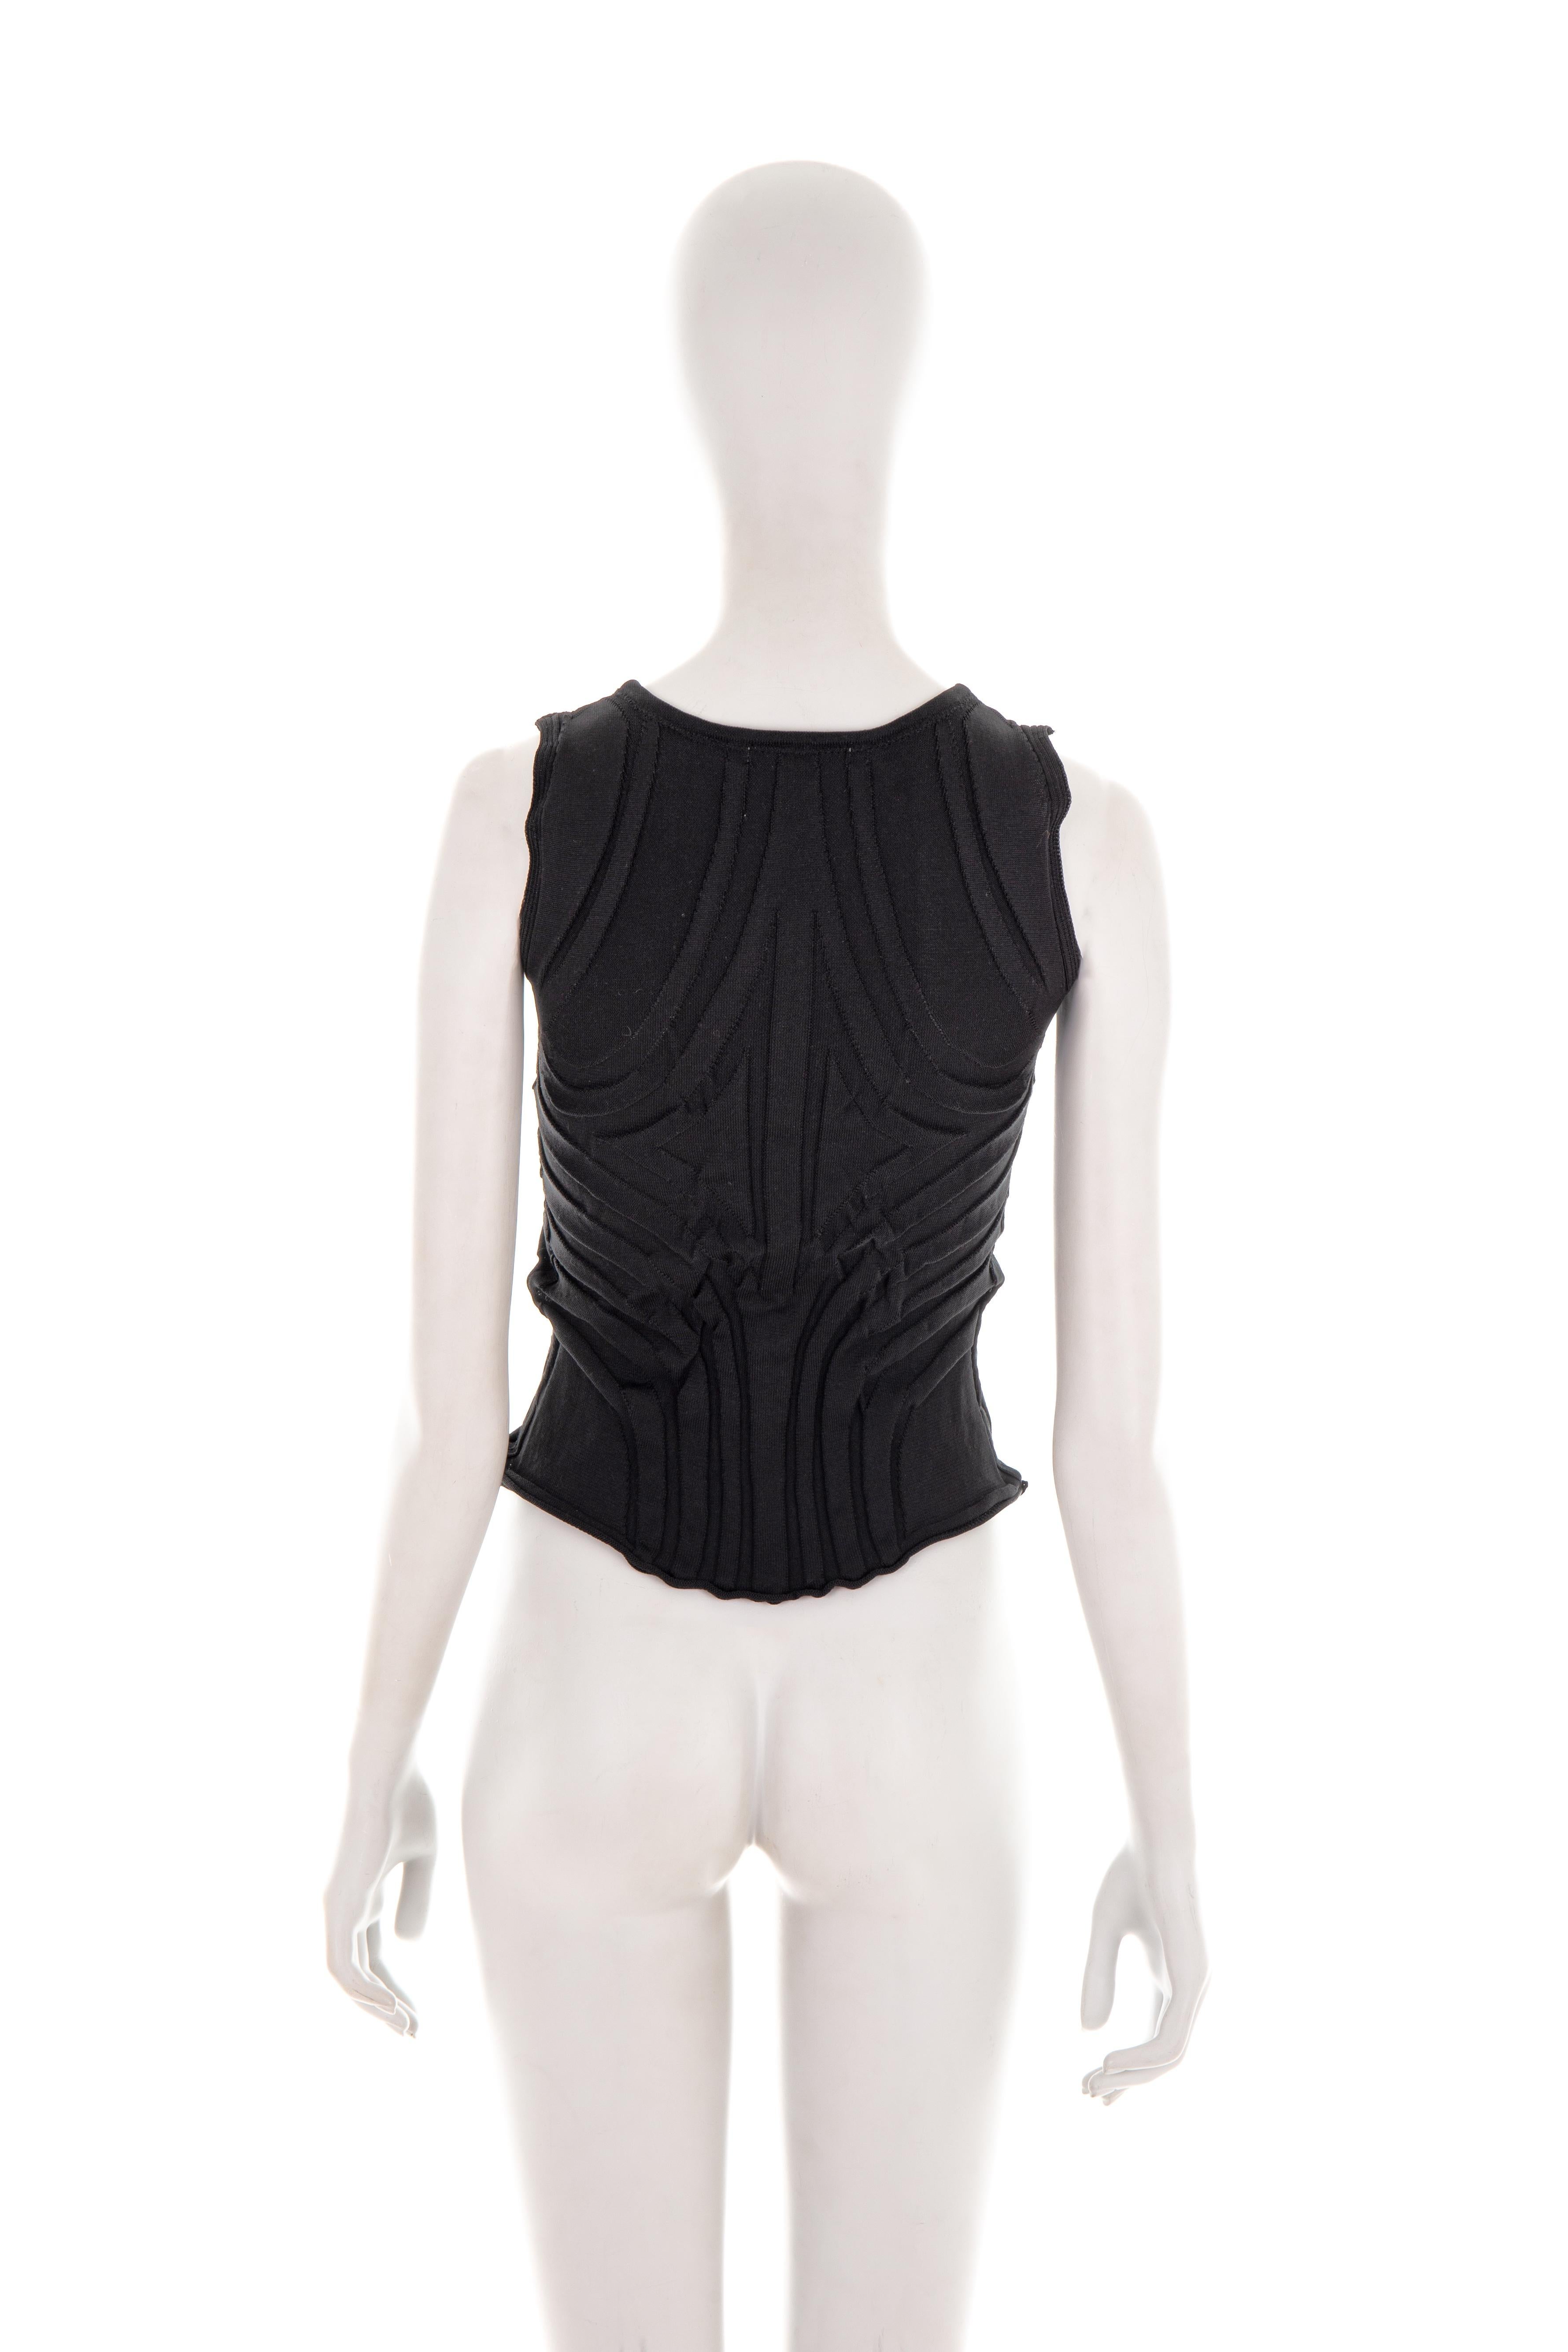 Issey Miyake S/S 2005 black Skeleton embossed top In Excellent Condition For Sale In Rome, IT